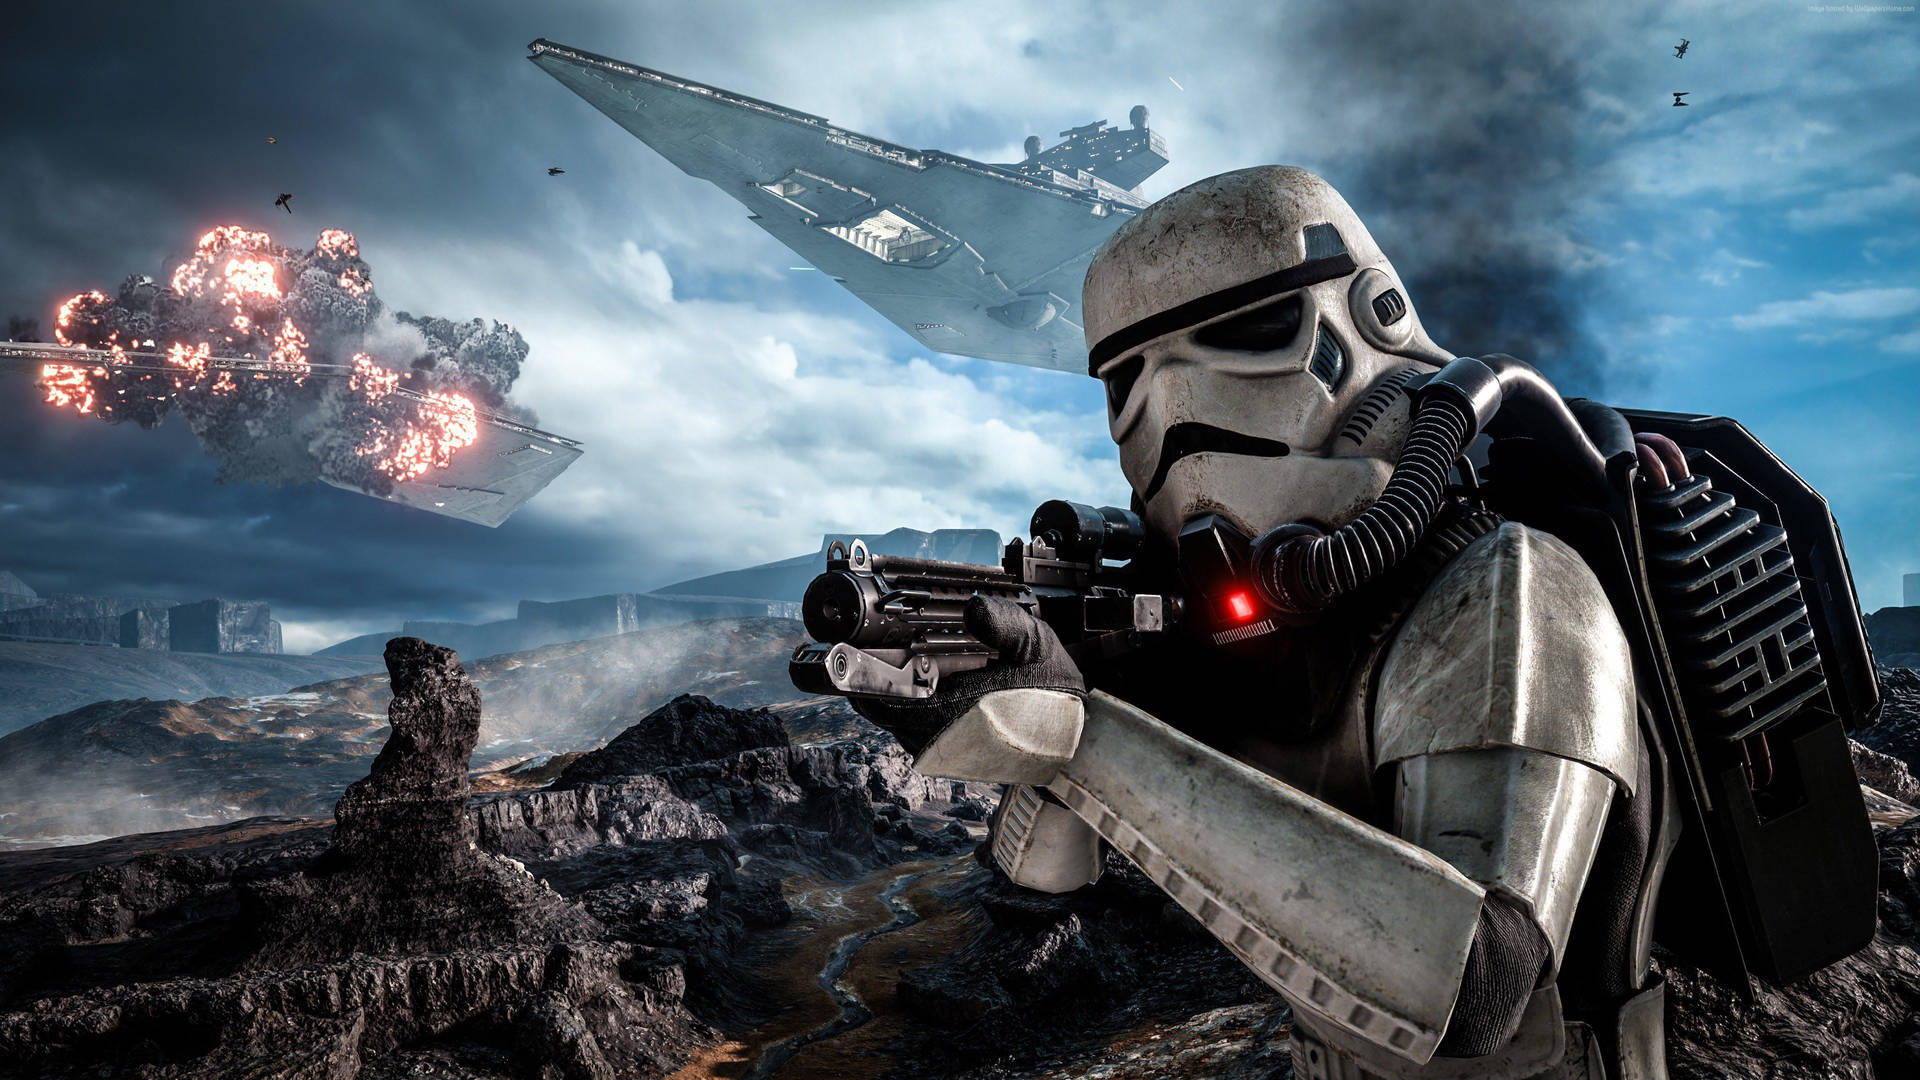 Stormtrooper reinforces Galactic Empire in the Star Wars universe Wallpaper